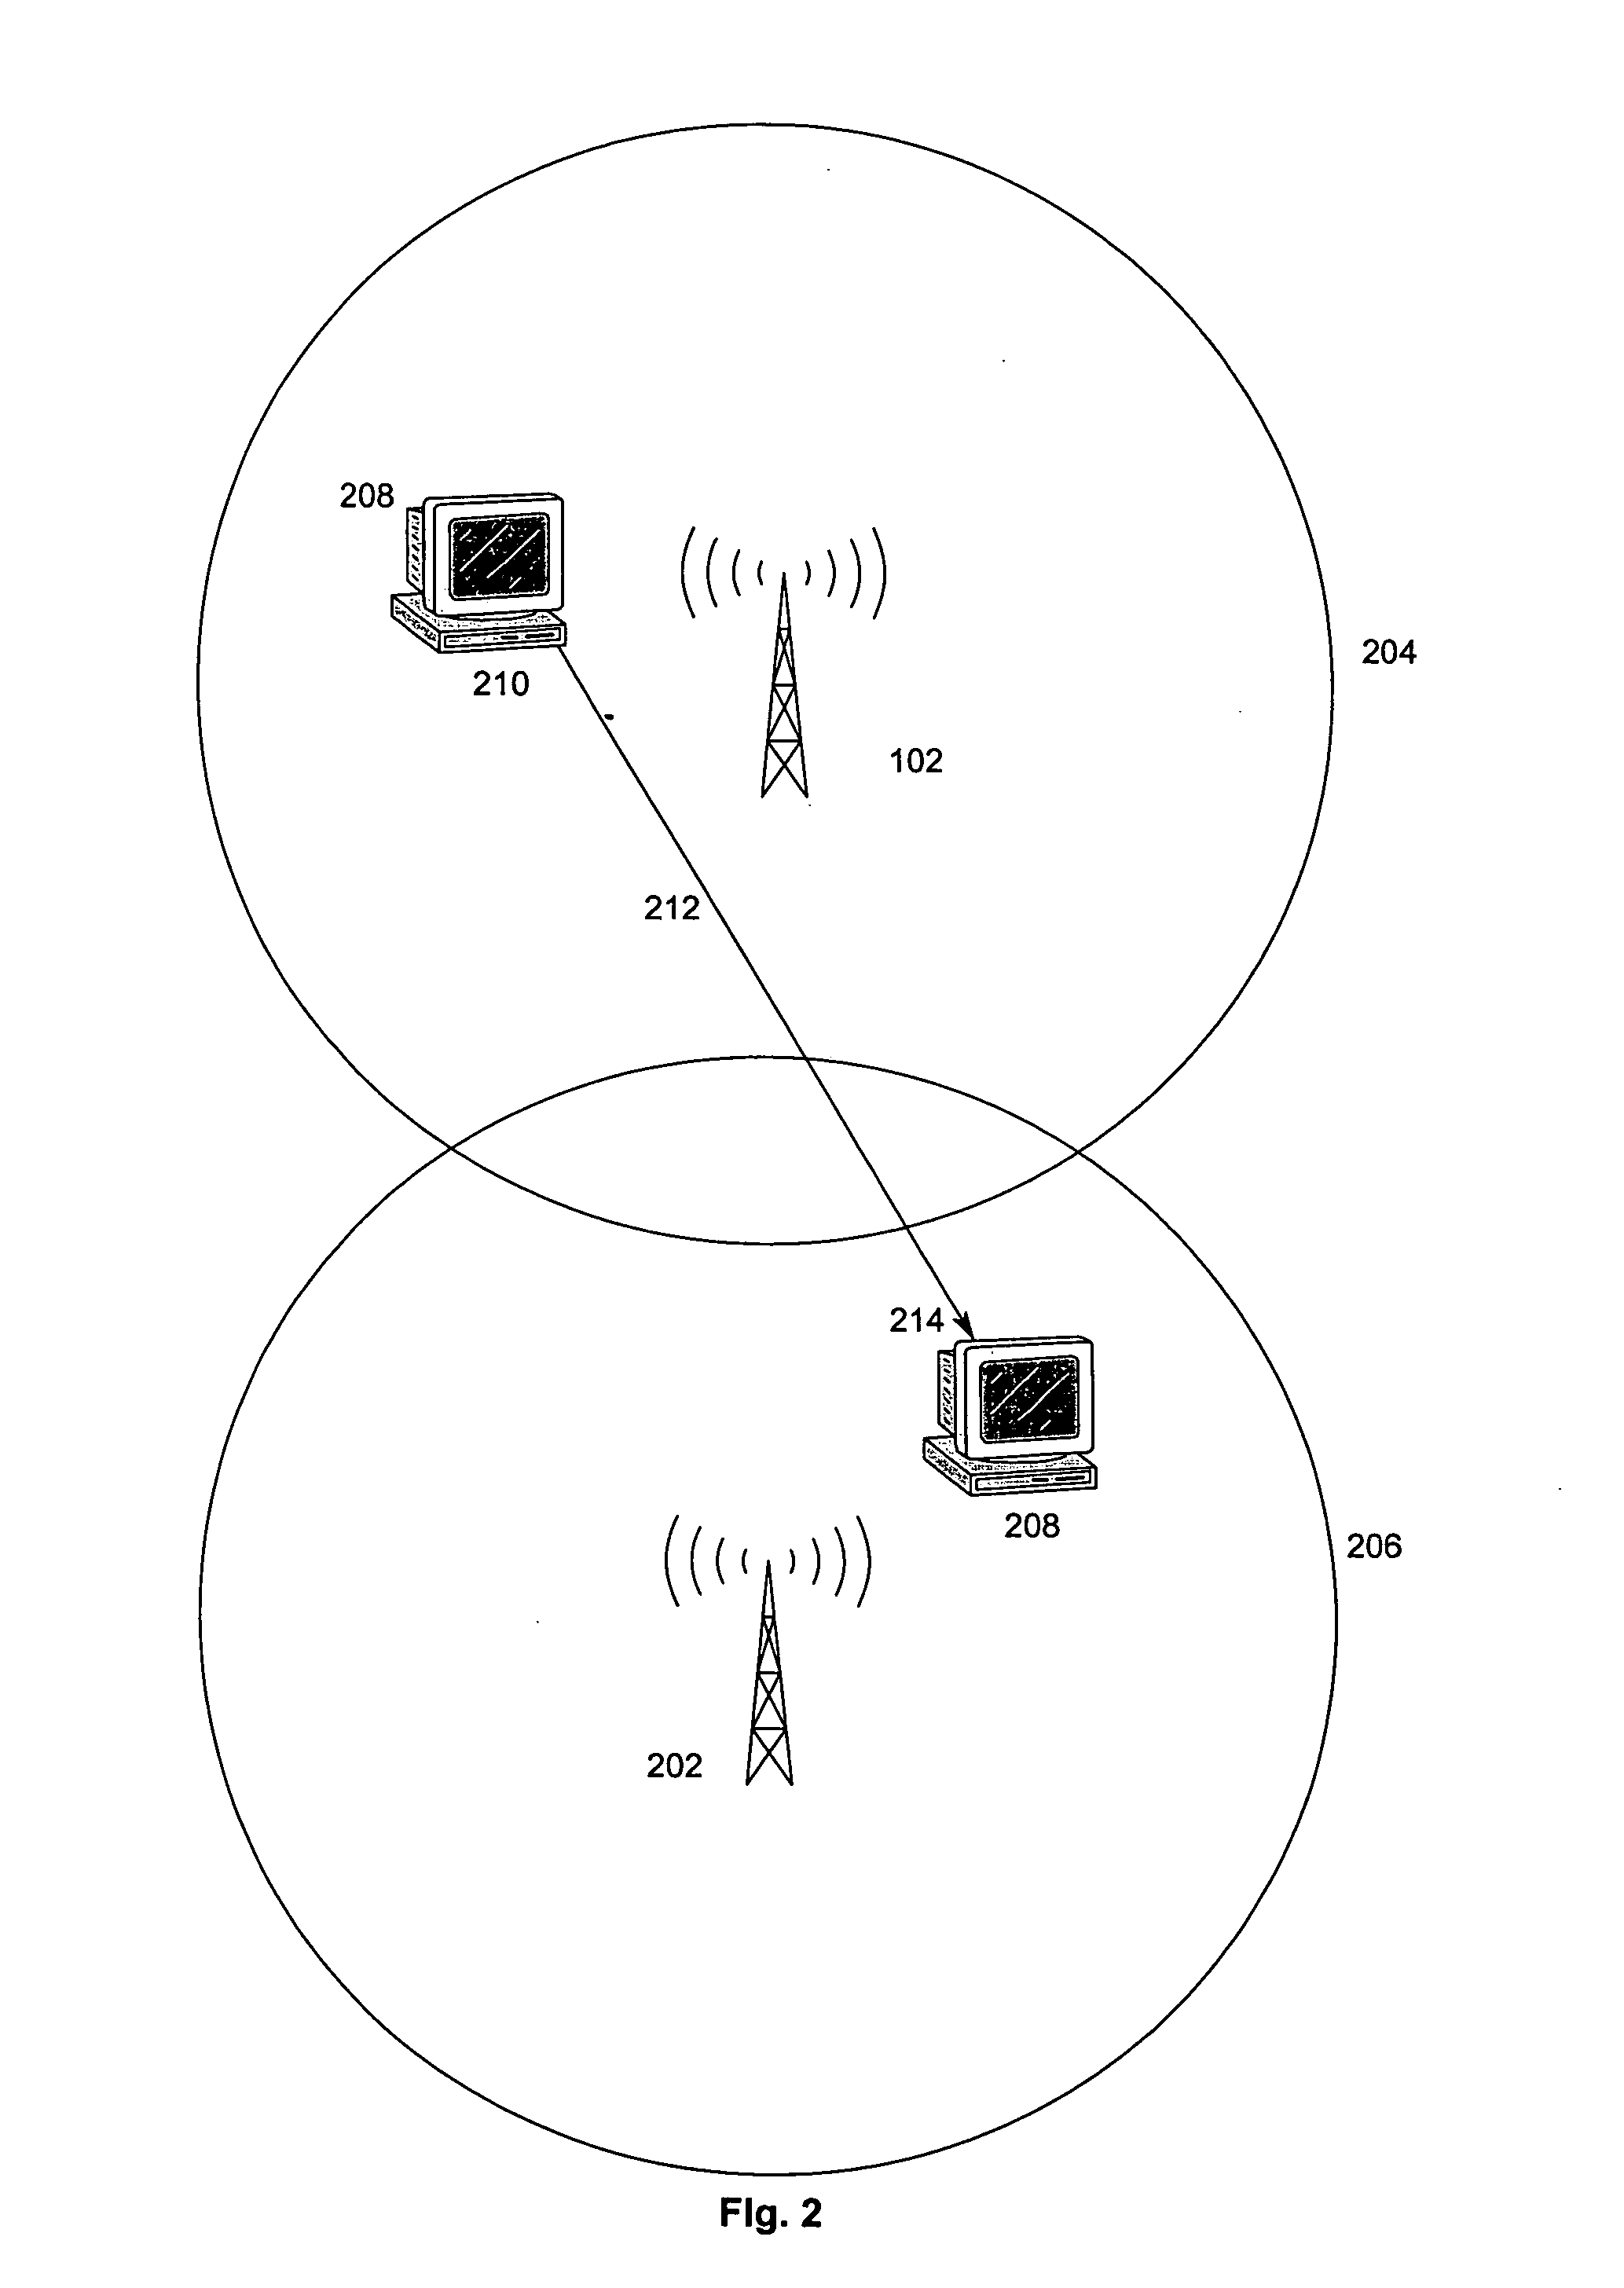 Method for grouping 802.11 stations into authorized service sets to differentiate network access and services